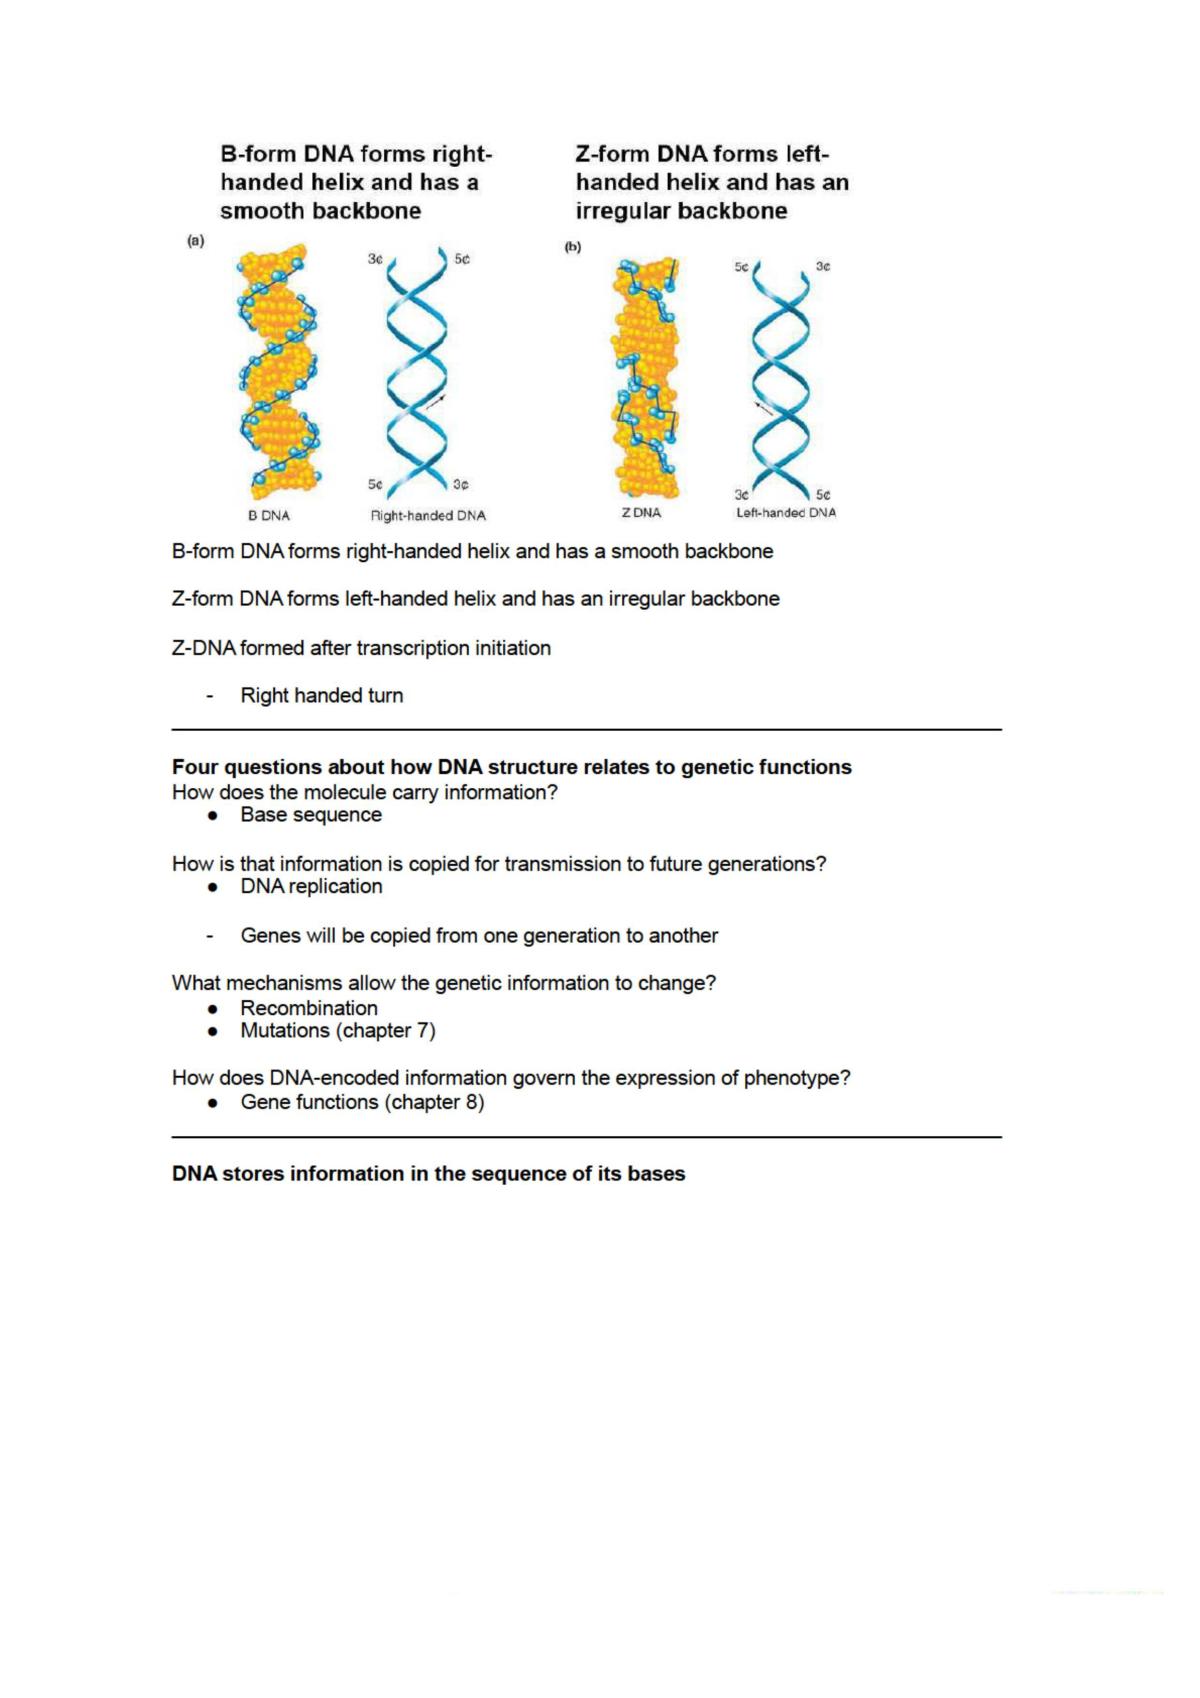 Lecture 6 - DNA structure, replication and recombination - Page 11